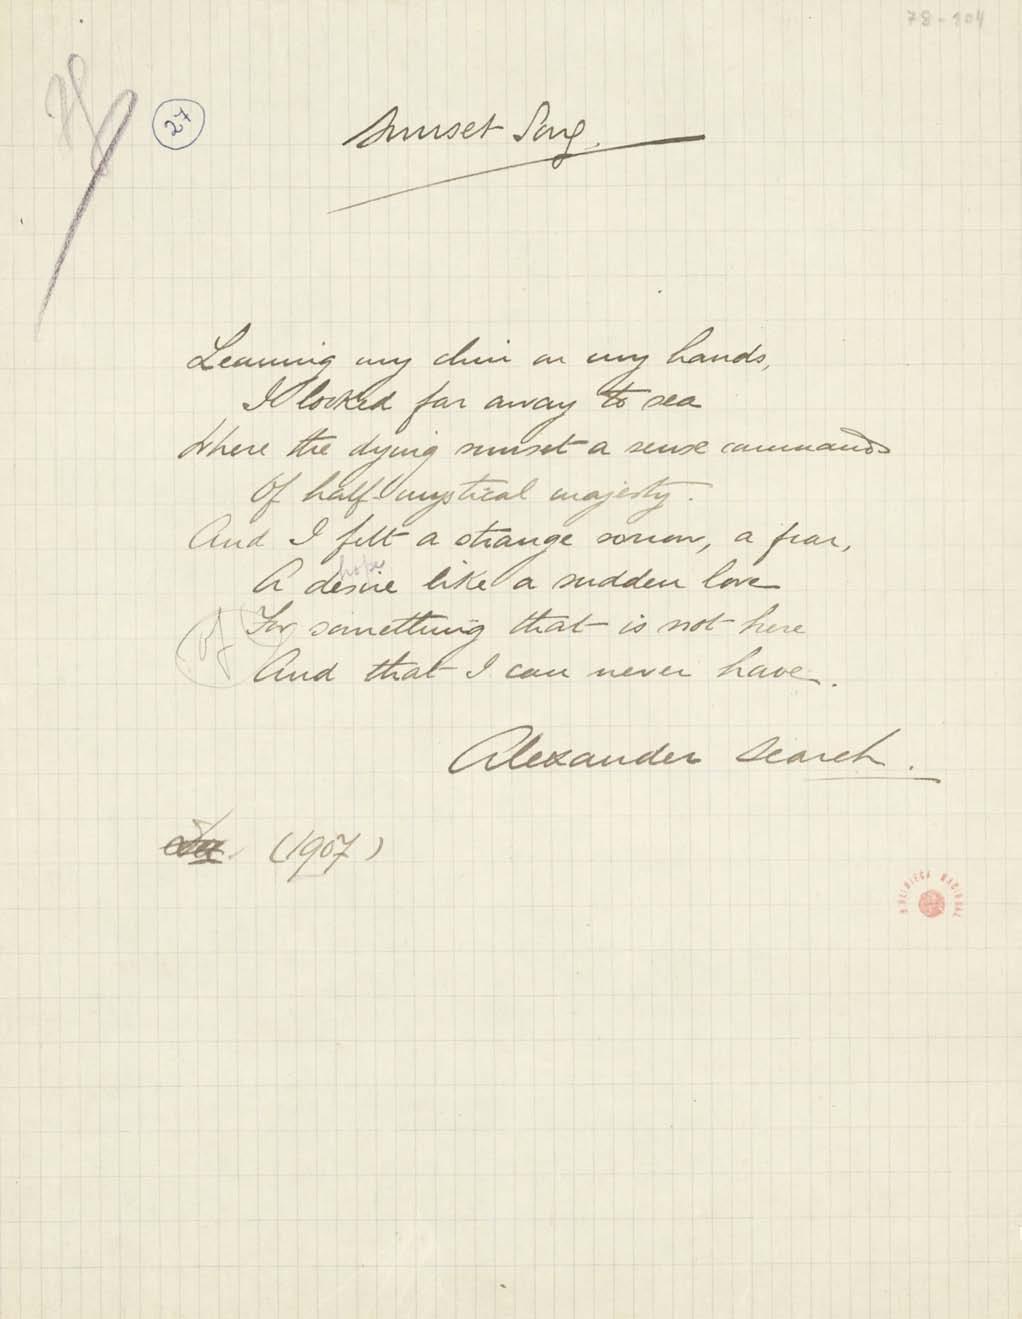 with a blue pencil used to cross out the verses; B, the later version, was written on grid paper in black ink, with emendations in graphite and purple pencils, bearing the signature Alexander Search